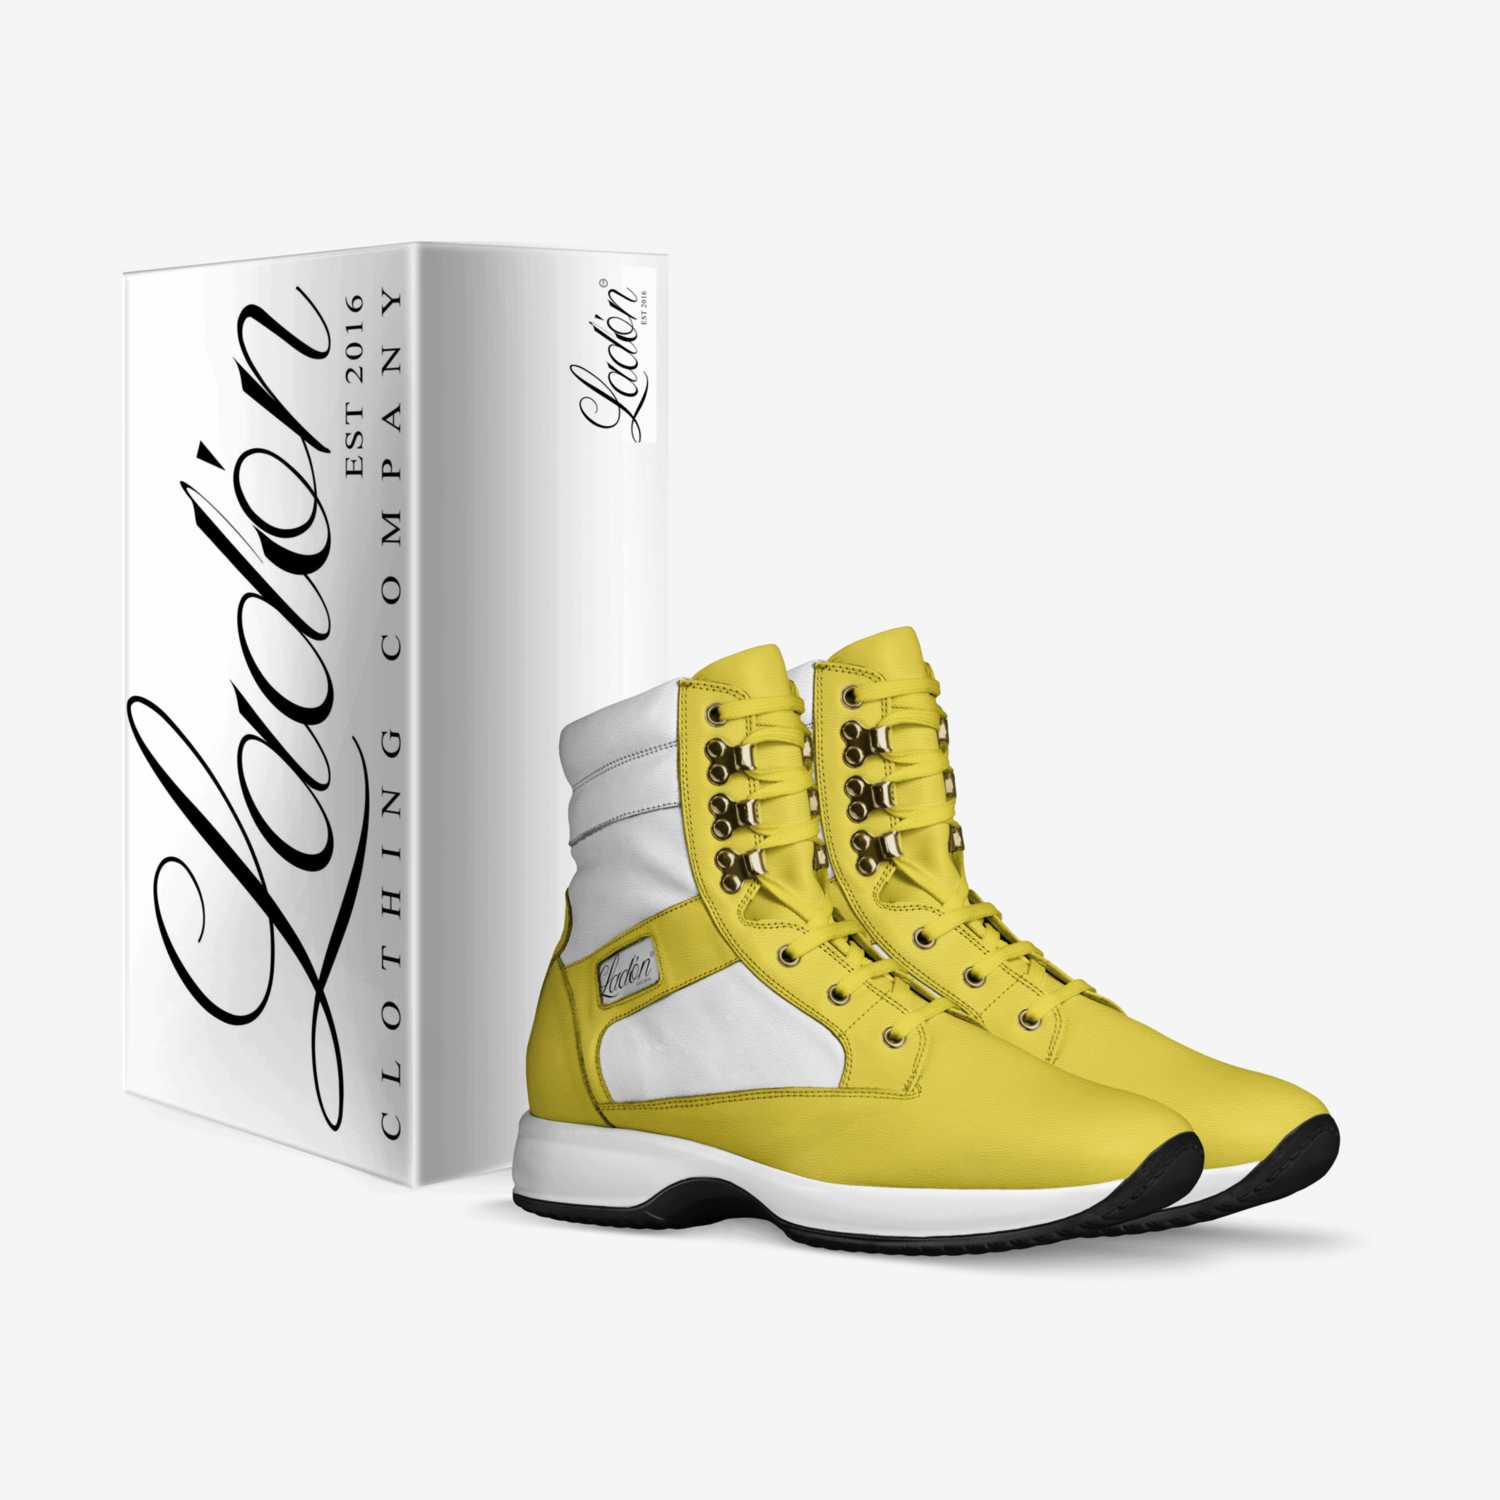 LOC1 custom made in Italy shoes by Ladón Clothing Company | Box view